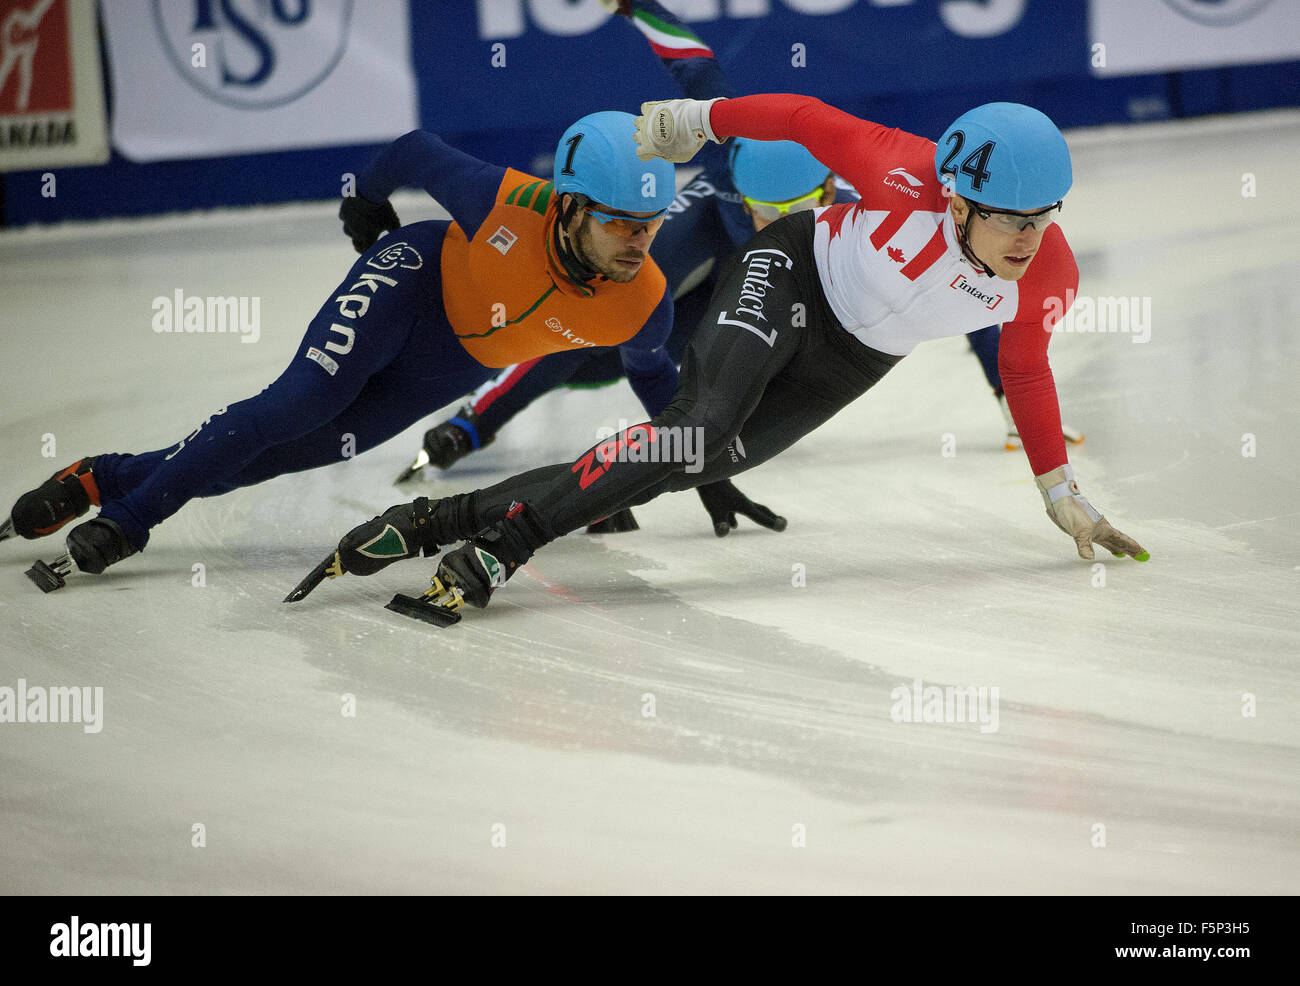 Toronto, Canada. 7 November 2015: ISU World Cup Short Track, Toronto - Patrick Duffy (24) (CAN) Leads Sjinkie Knelt (1) (NED) in the men's 1500m semi-final. Photo: Peter Llewellyn/Alamy Live News Stock Photo